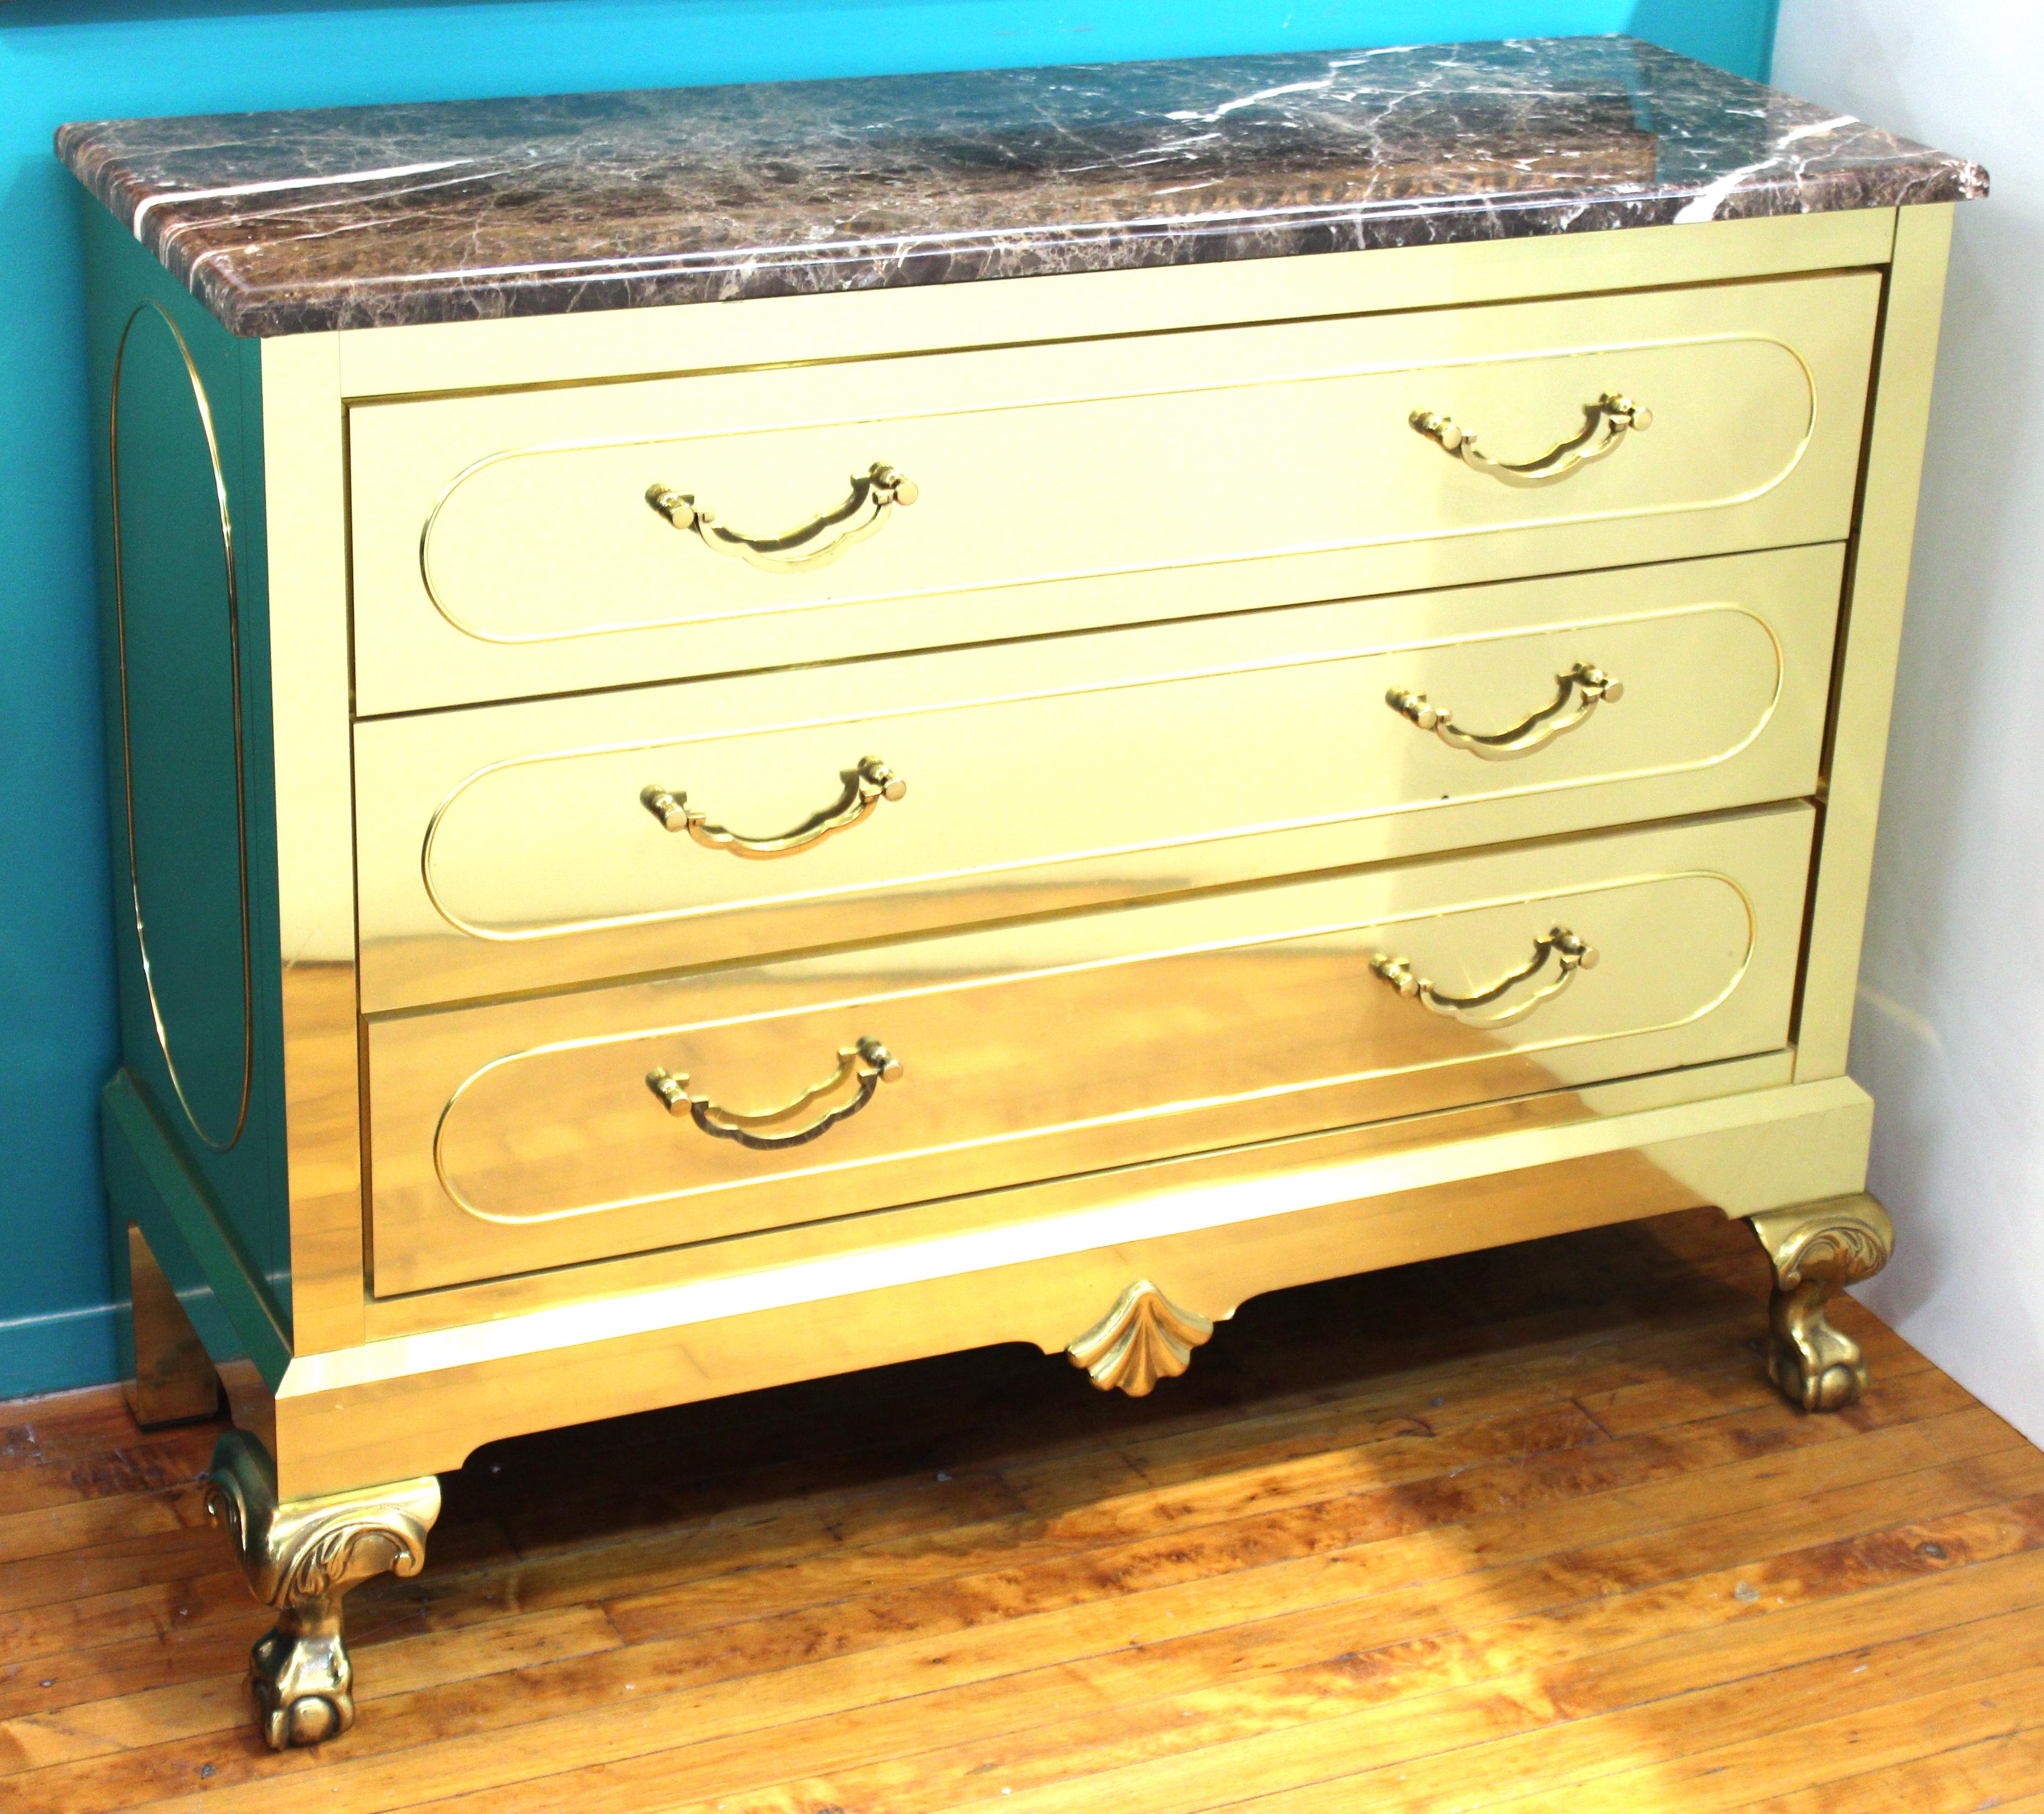 American Modern brass-clad chest of four drawers with marble top, made during the 1980's by Harden Furniture. The piece is part of the 'Import Collection' and has a marble top that is finished on all four sides. In great vintage condition.